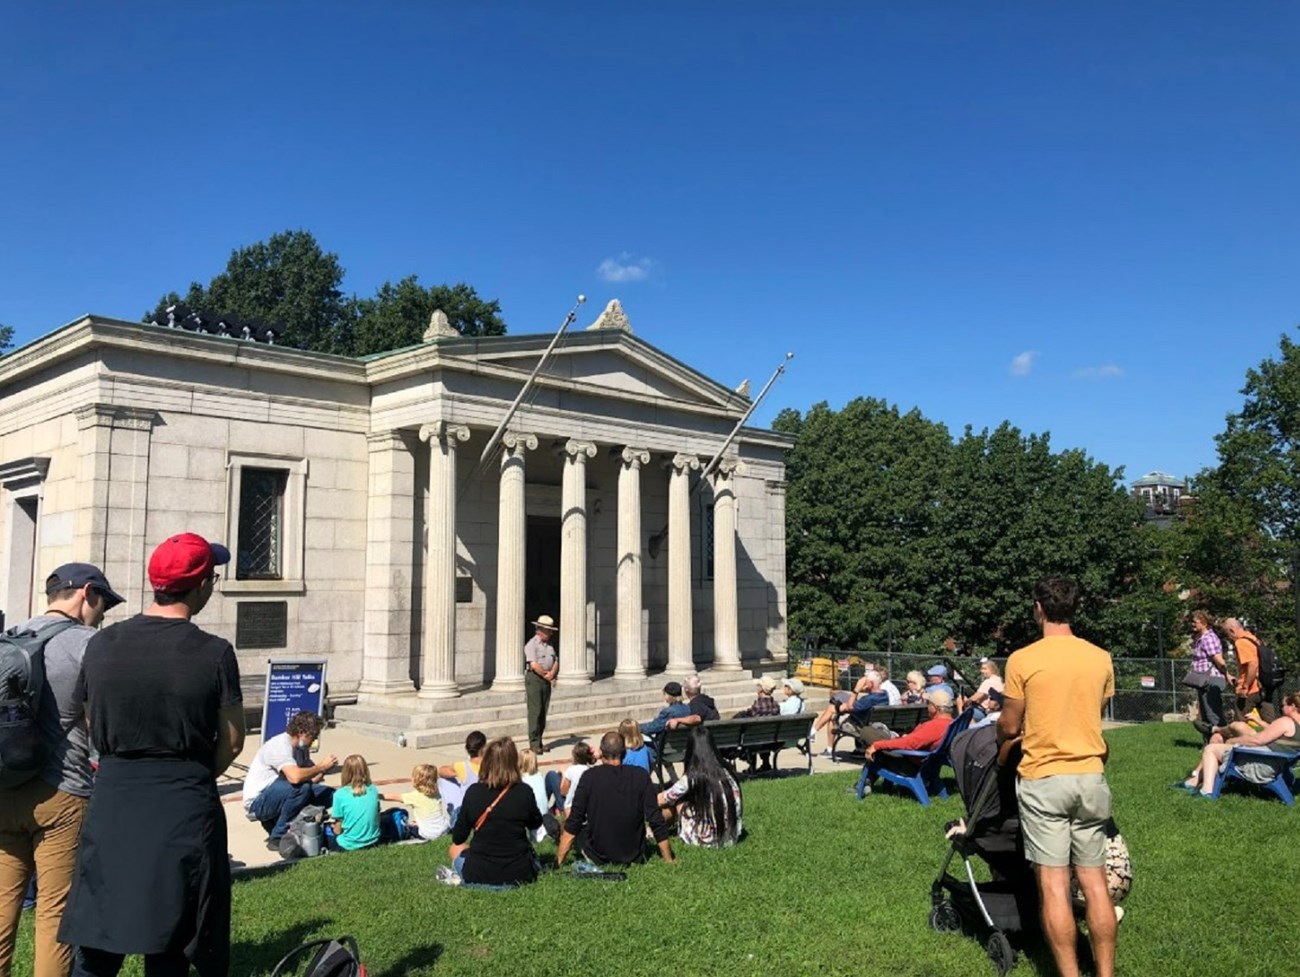 Ranger standing in front of a columned granite building and talking with a group of visitors who are dispersed around him.